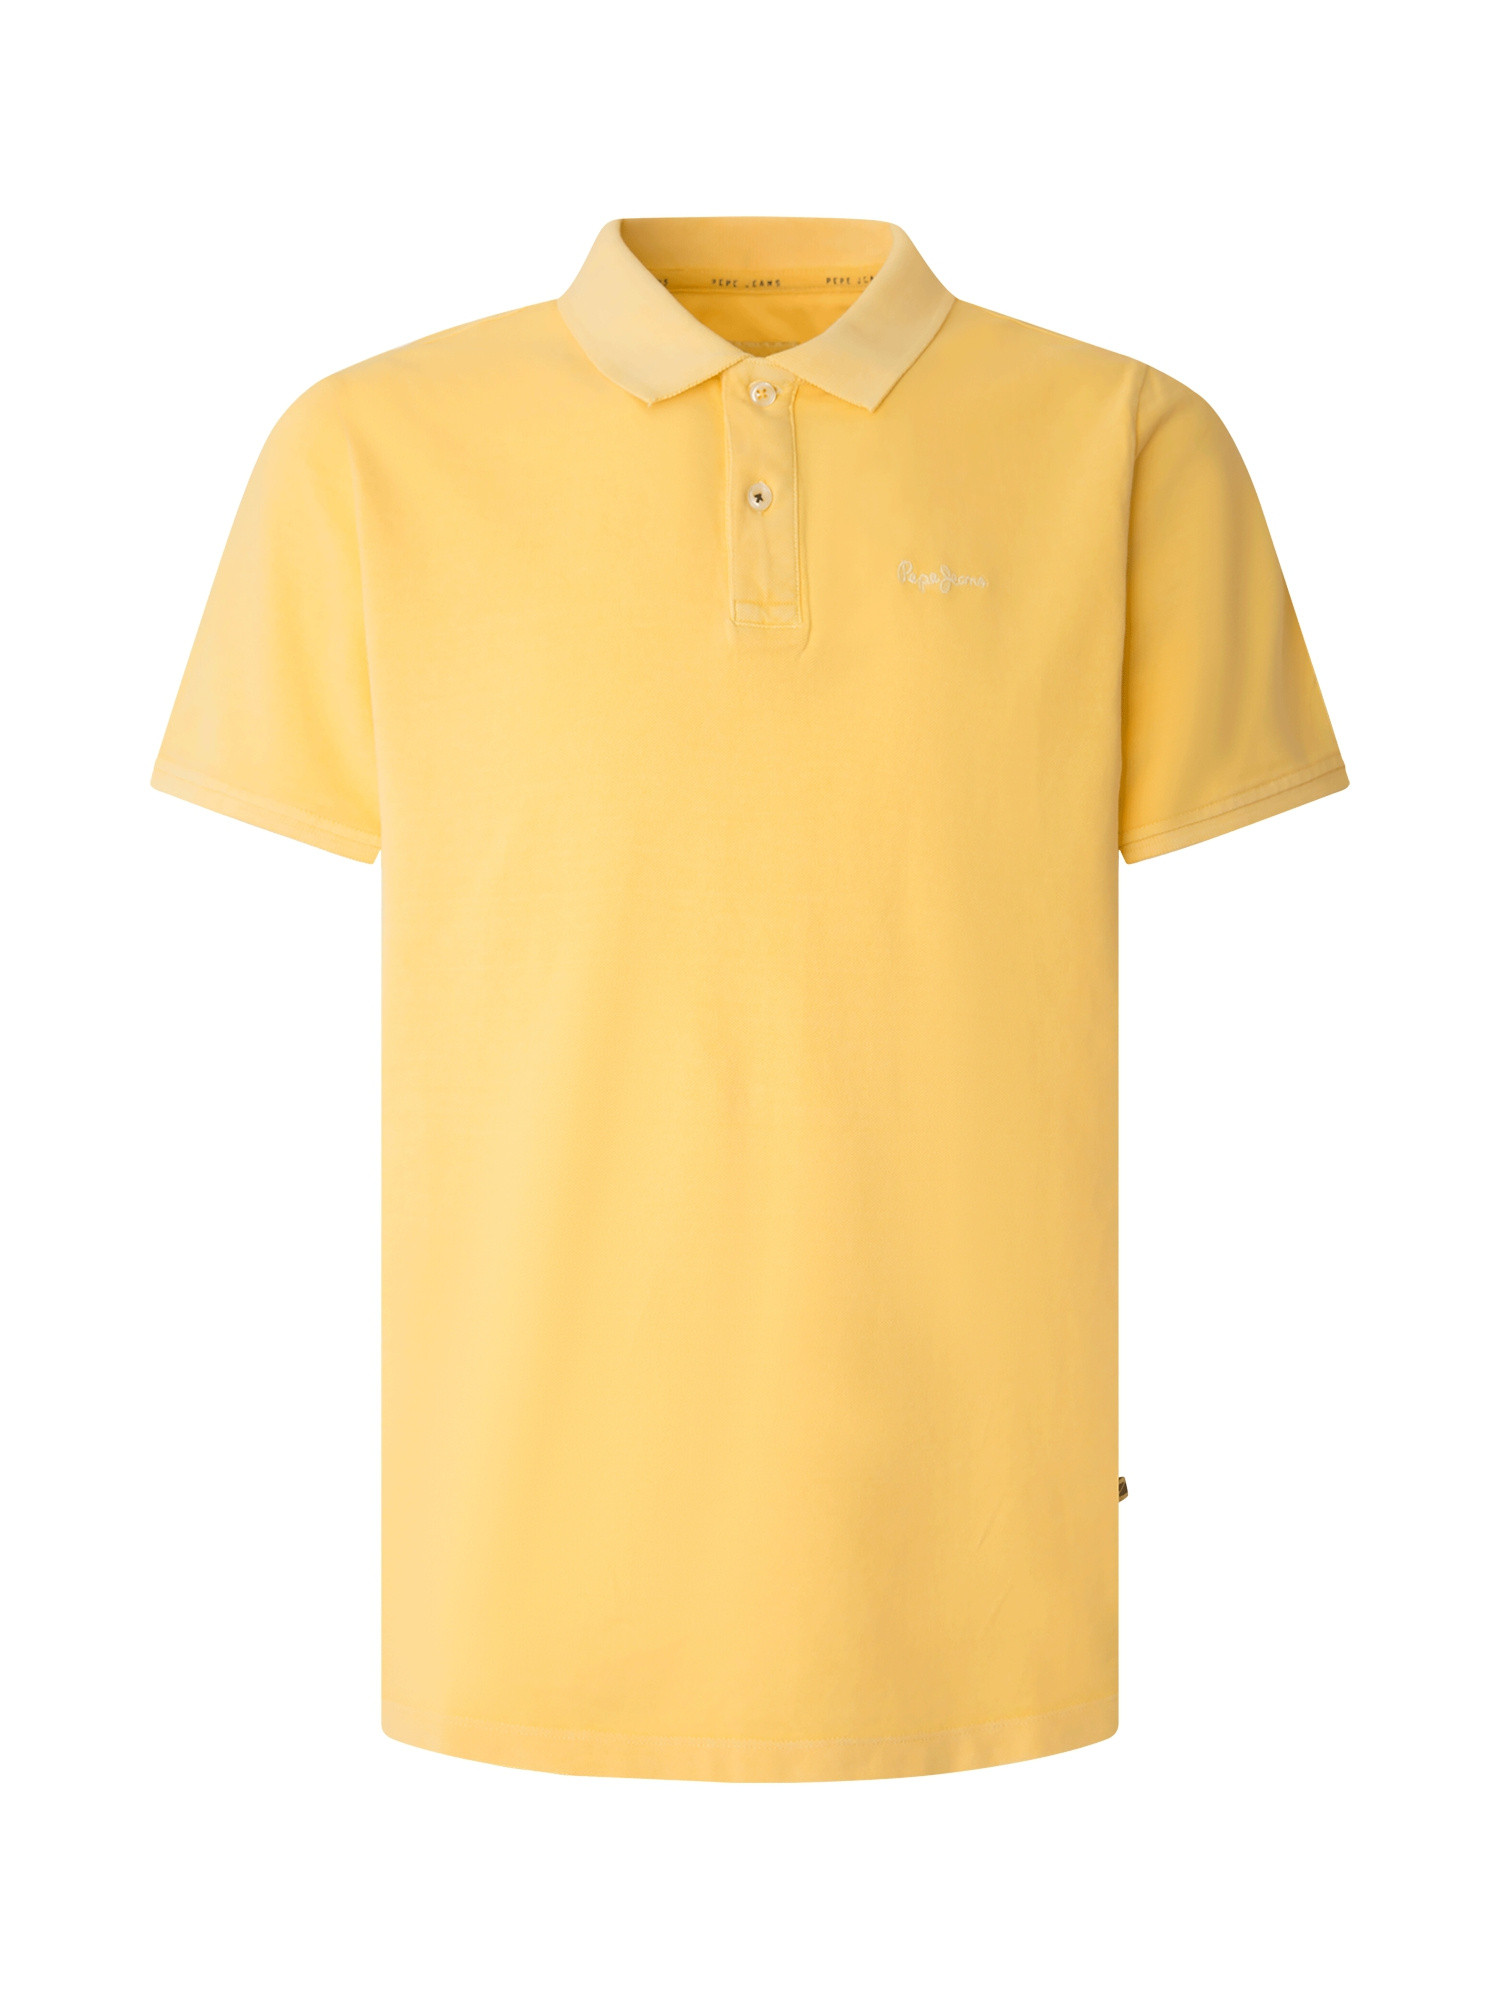 Pepe Jeans - Polo con logo in cotone, Giallo girasole, large image number 0